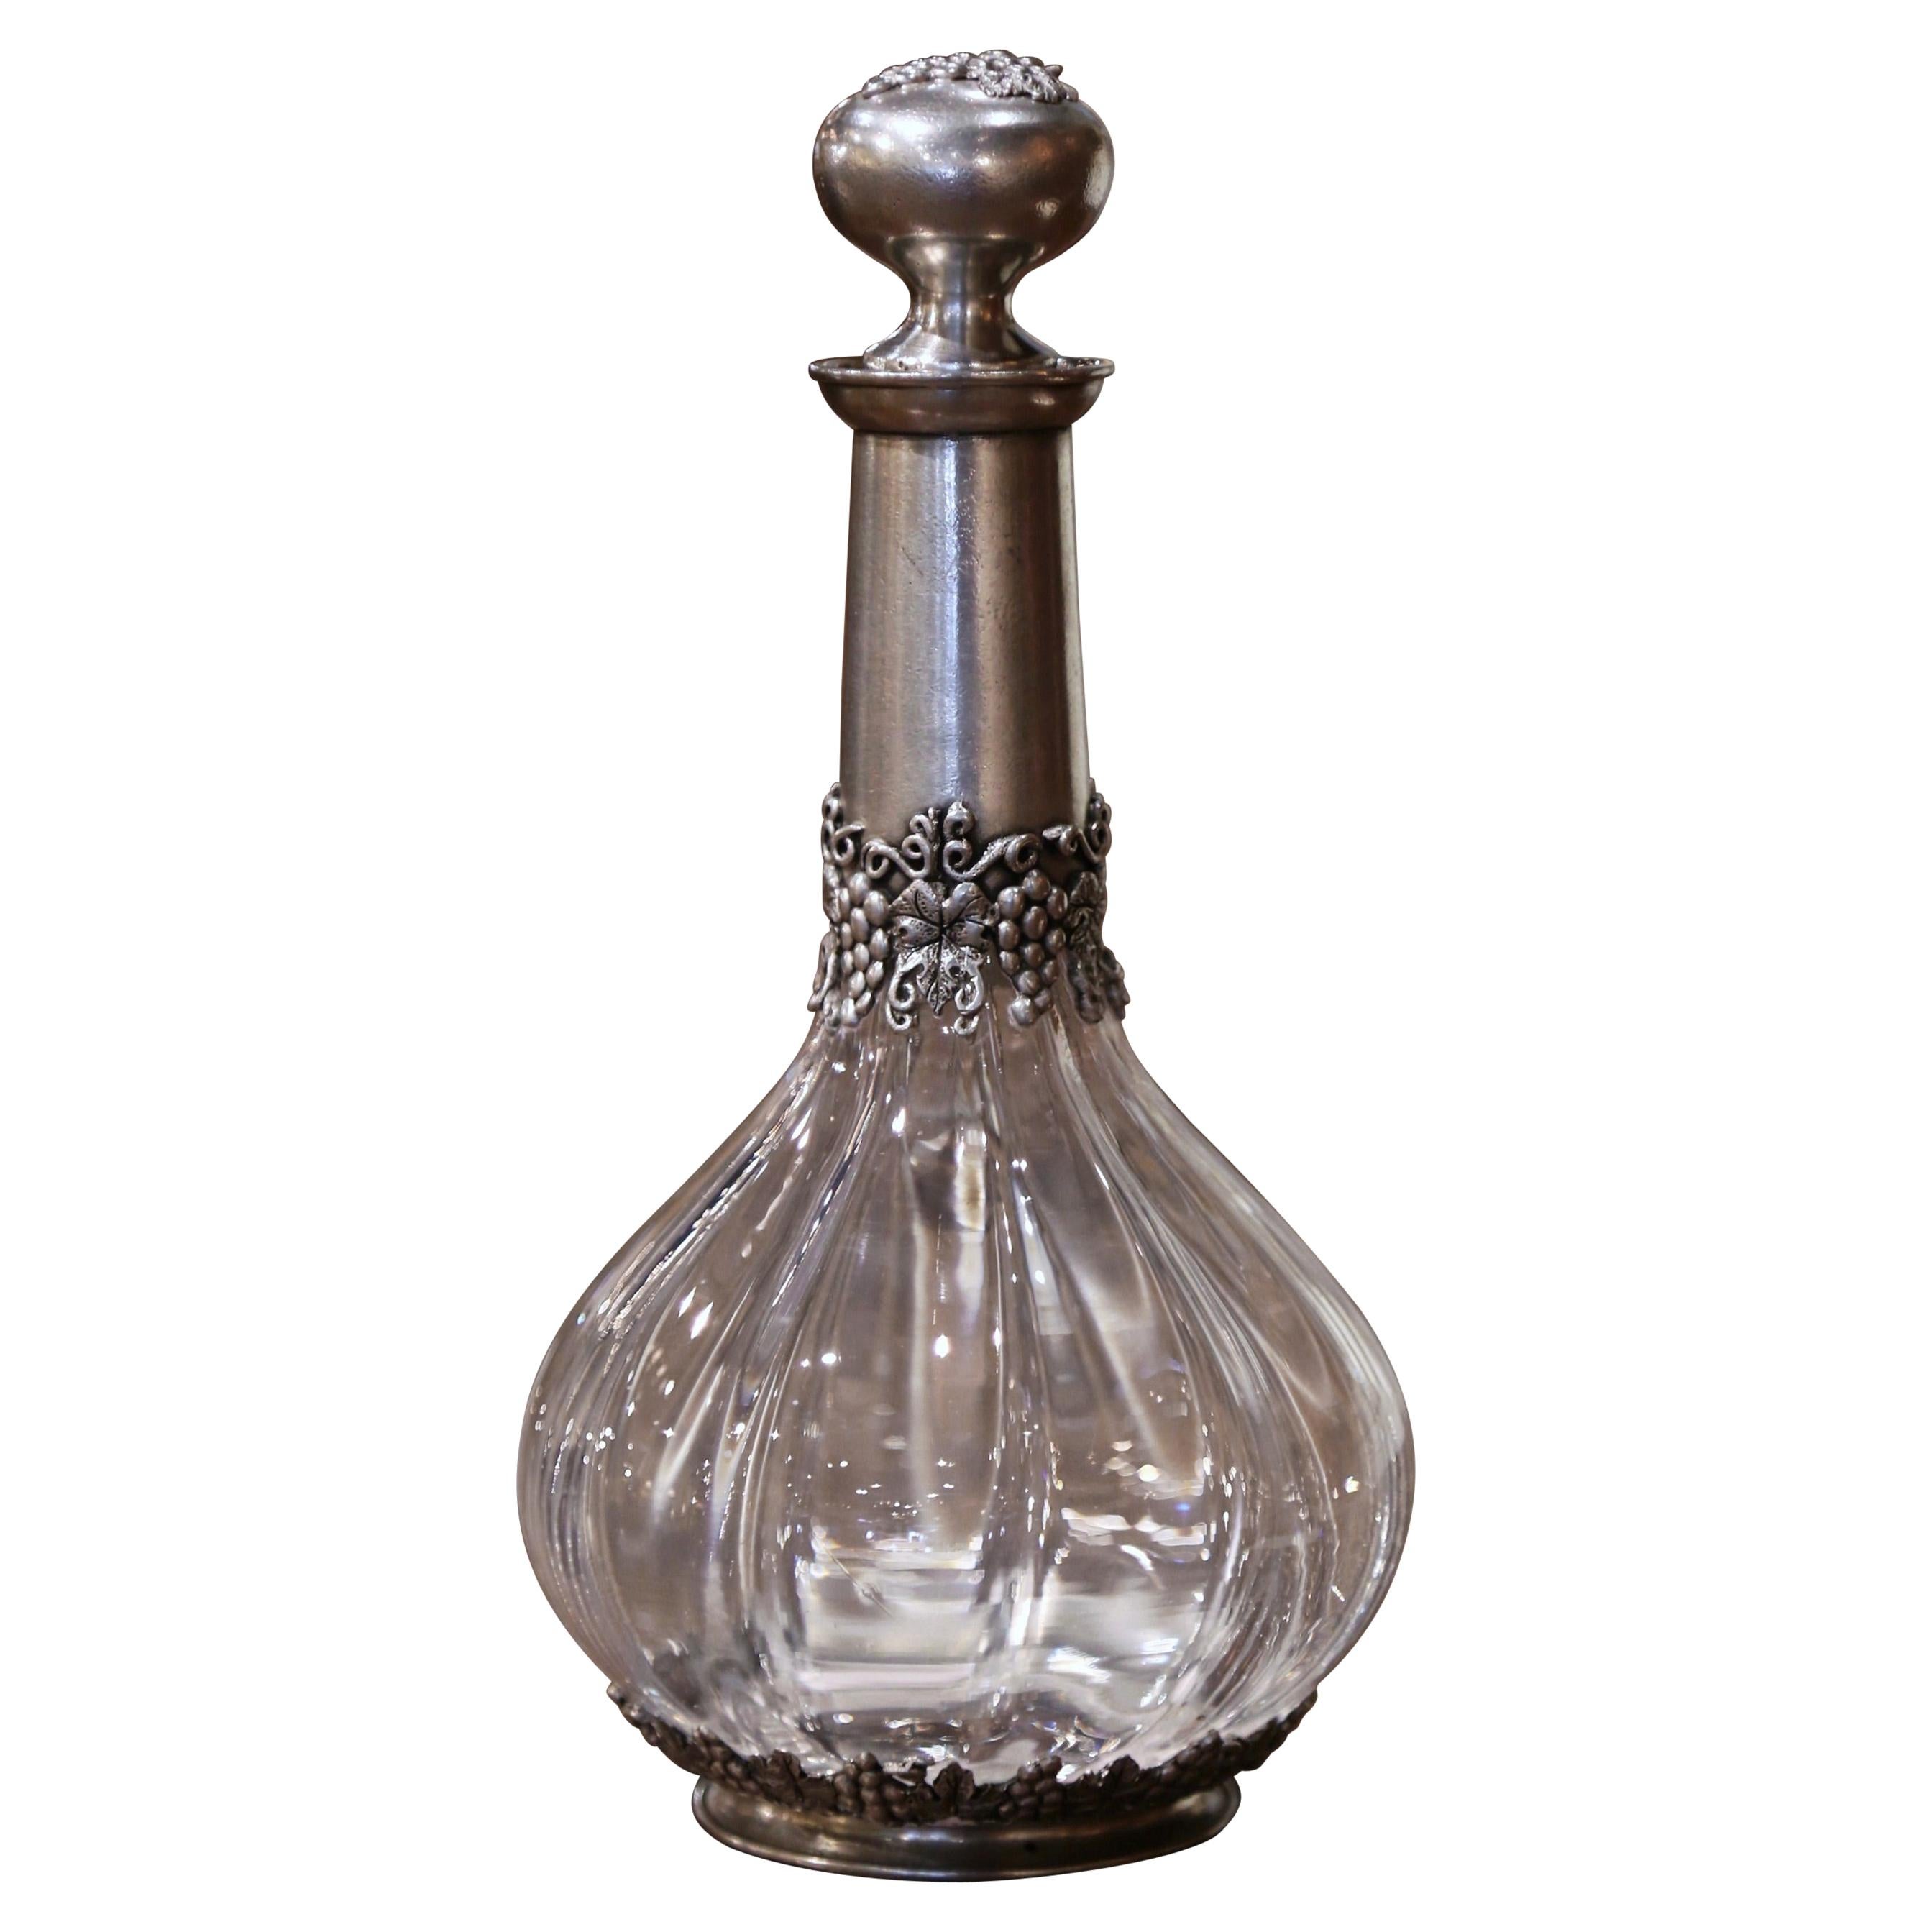 https://a.1stdibscdn.com/mid-century-french-crystal-and-pewter-wine-carafe-decanter-with-grape-decor-for-sale/1121189/f_241904221625130539707/24190422_master.jpeg